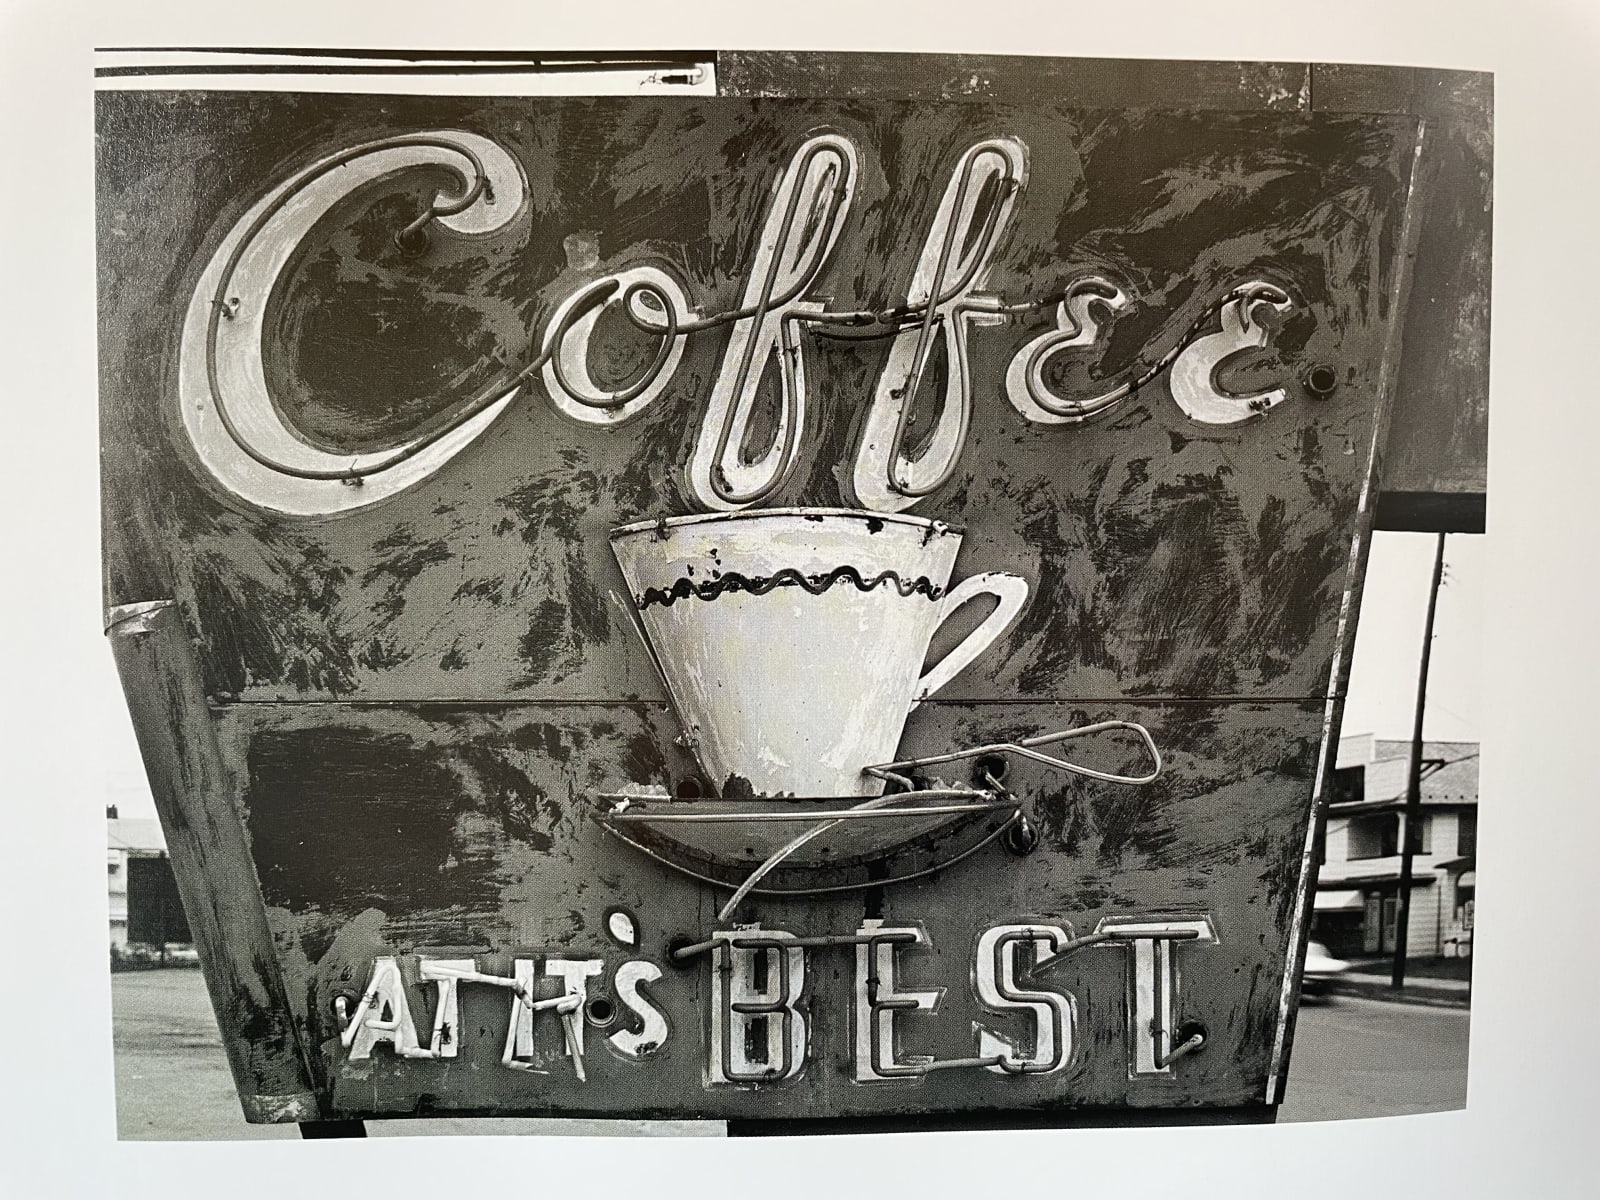 Jim Dow, Coffee at Its Best, US11, Pittston, PA, 1973